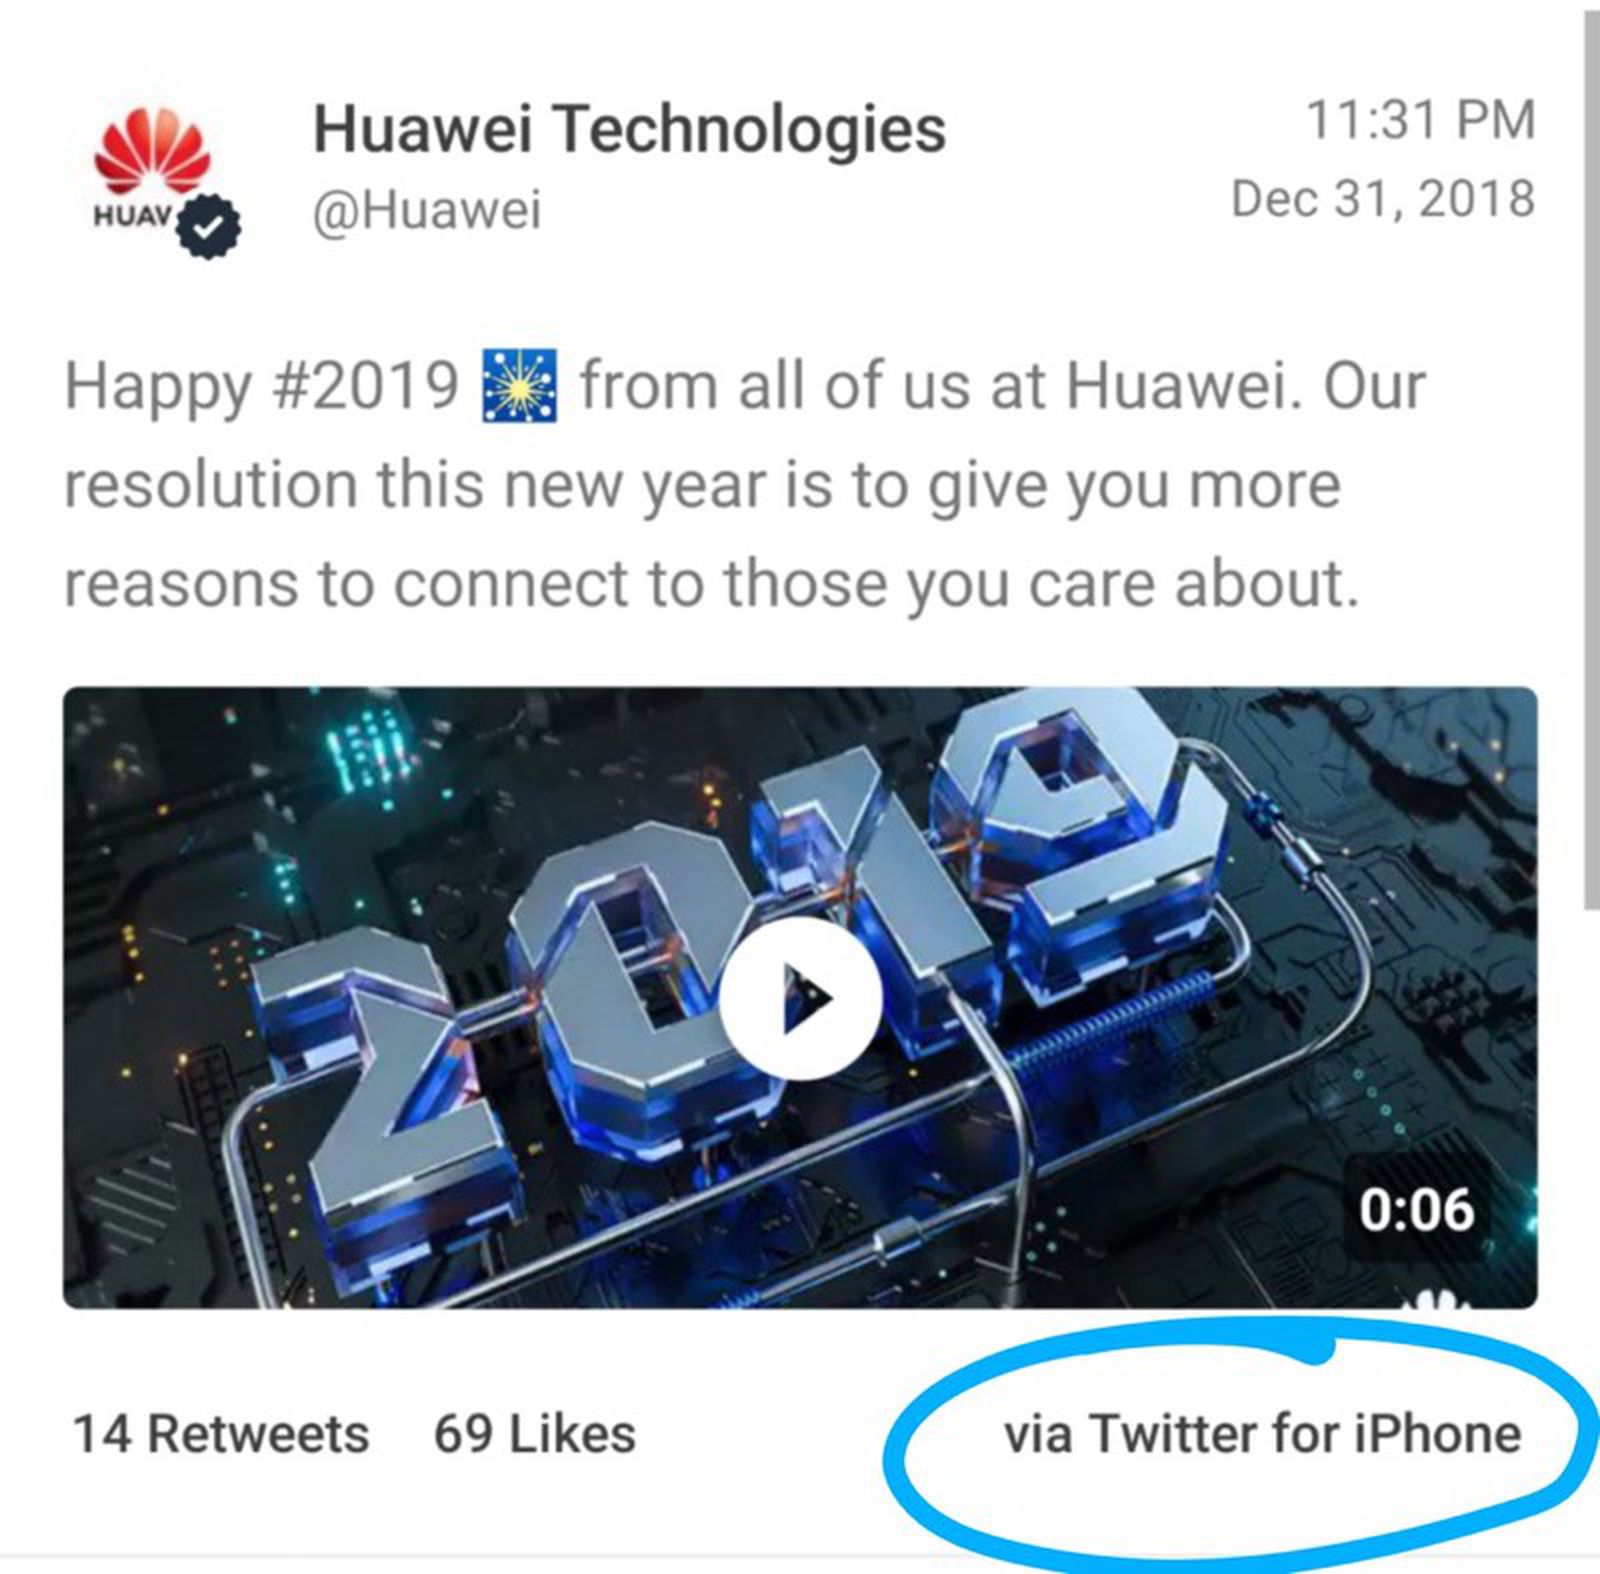 Android Promoters Won't Get Caught Tweeting From iPhone Anymore With Upcoming Twitter Changes - macrumors.com